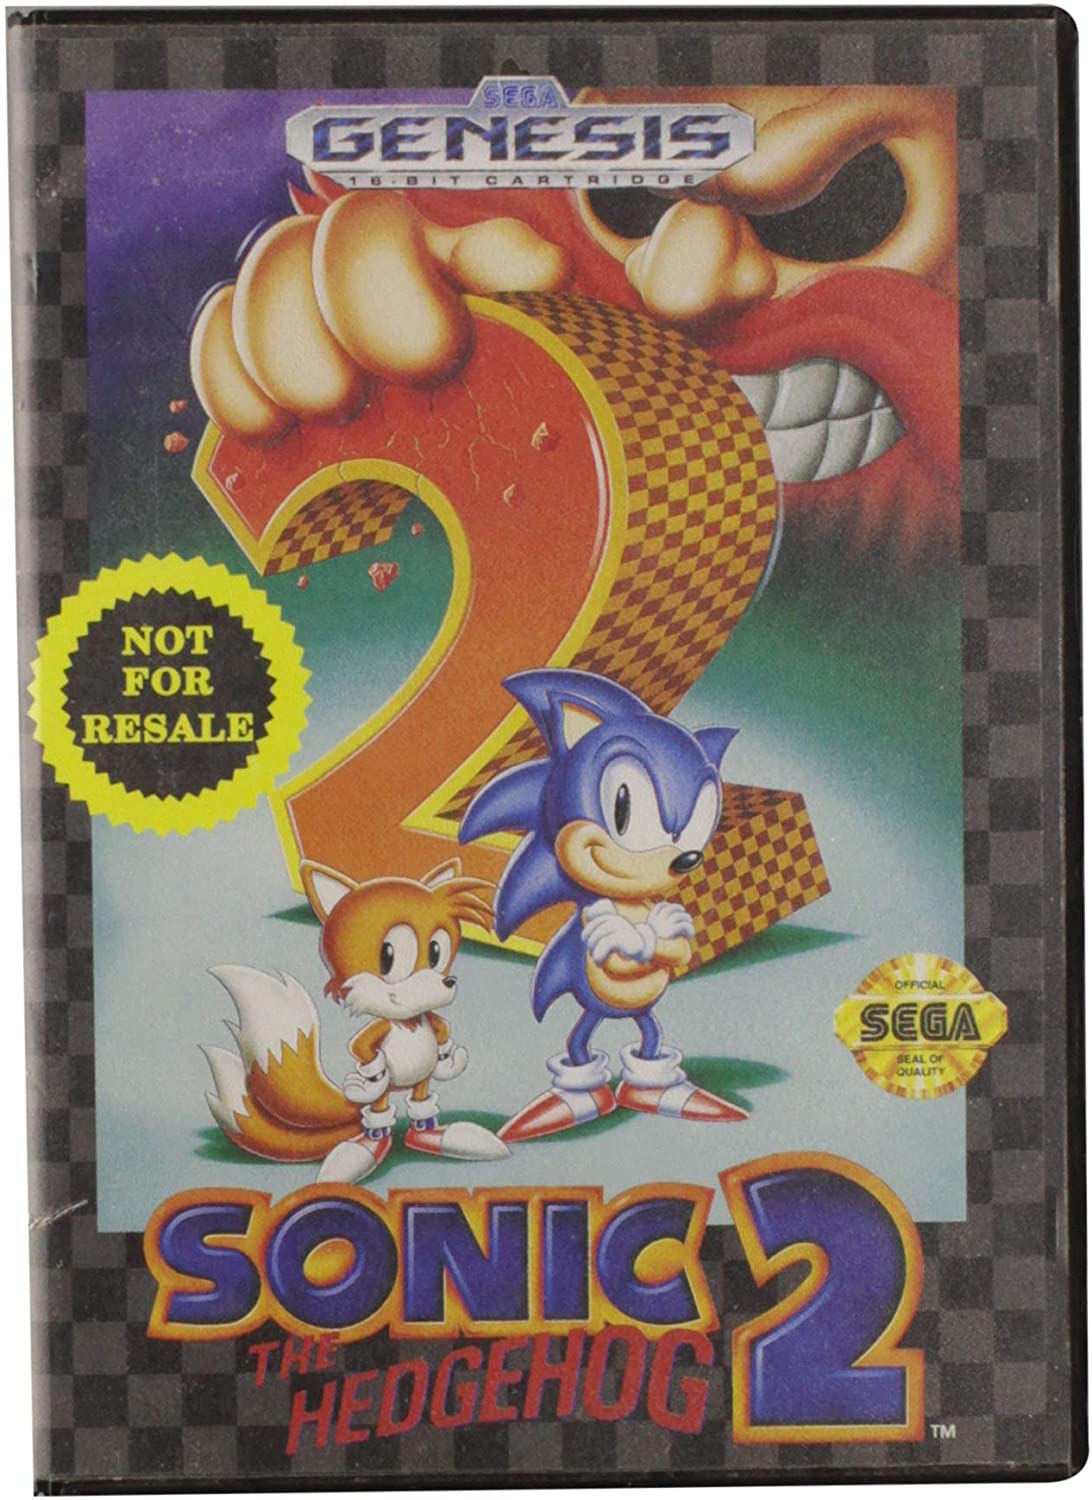 Sonic the Hedgehog 2 (Not For Resale Version) - Genesis (Pre-owned)